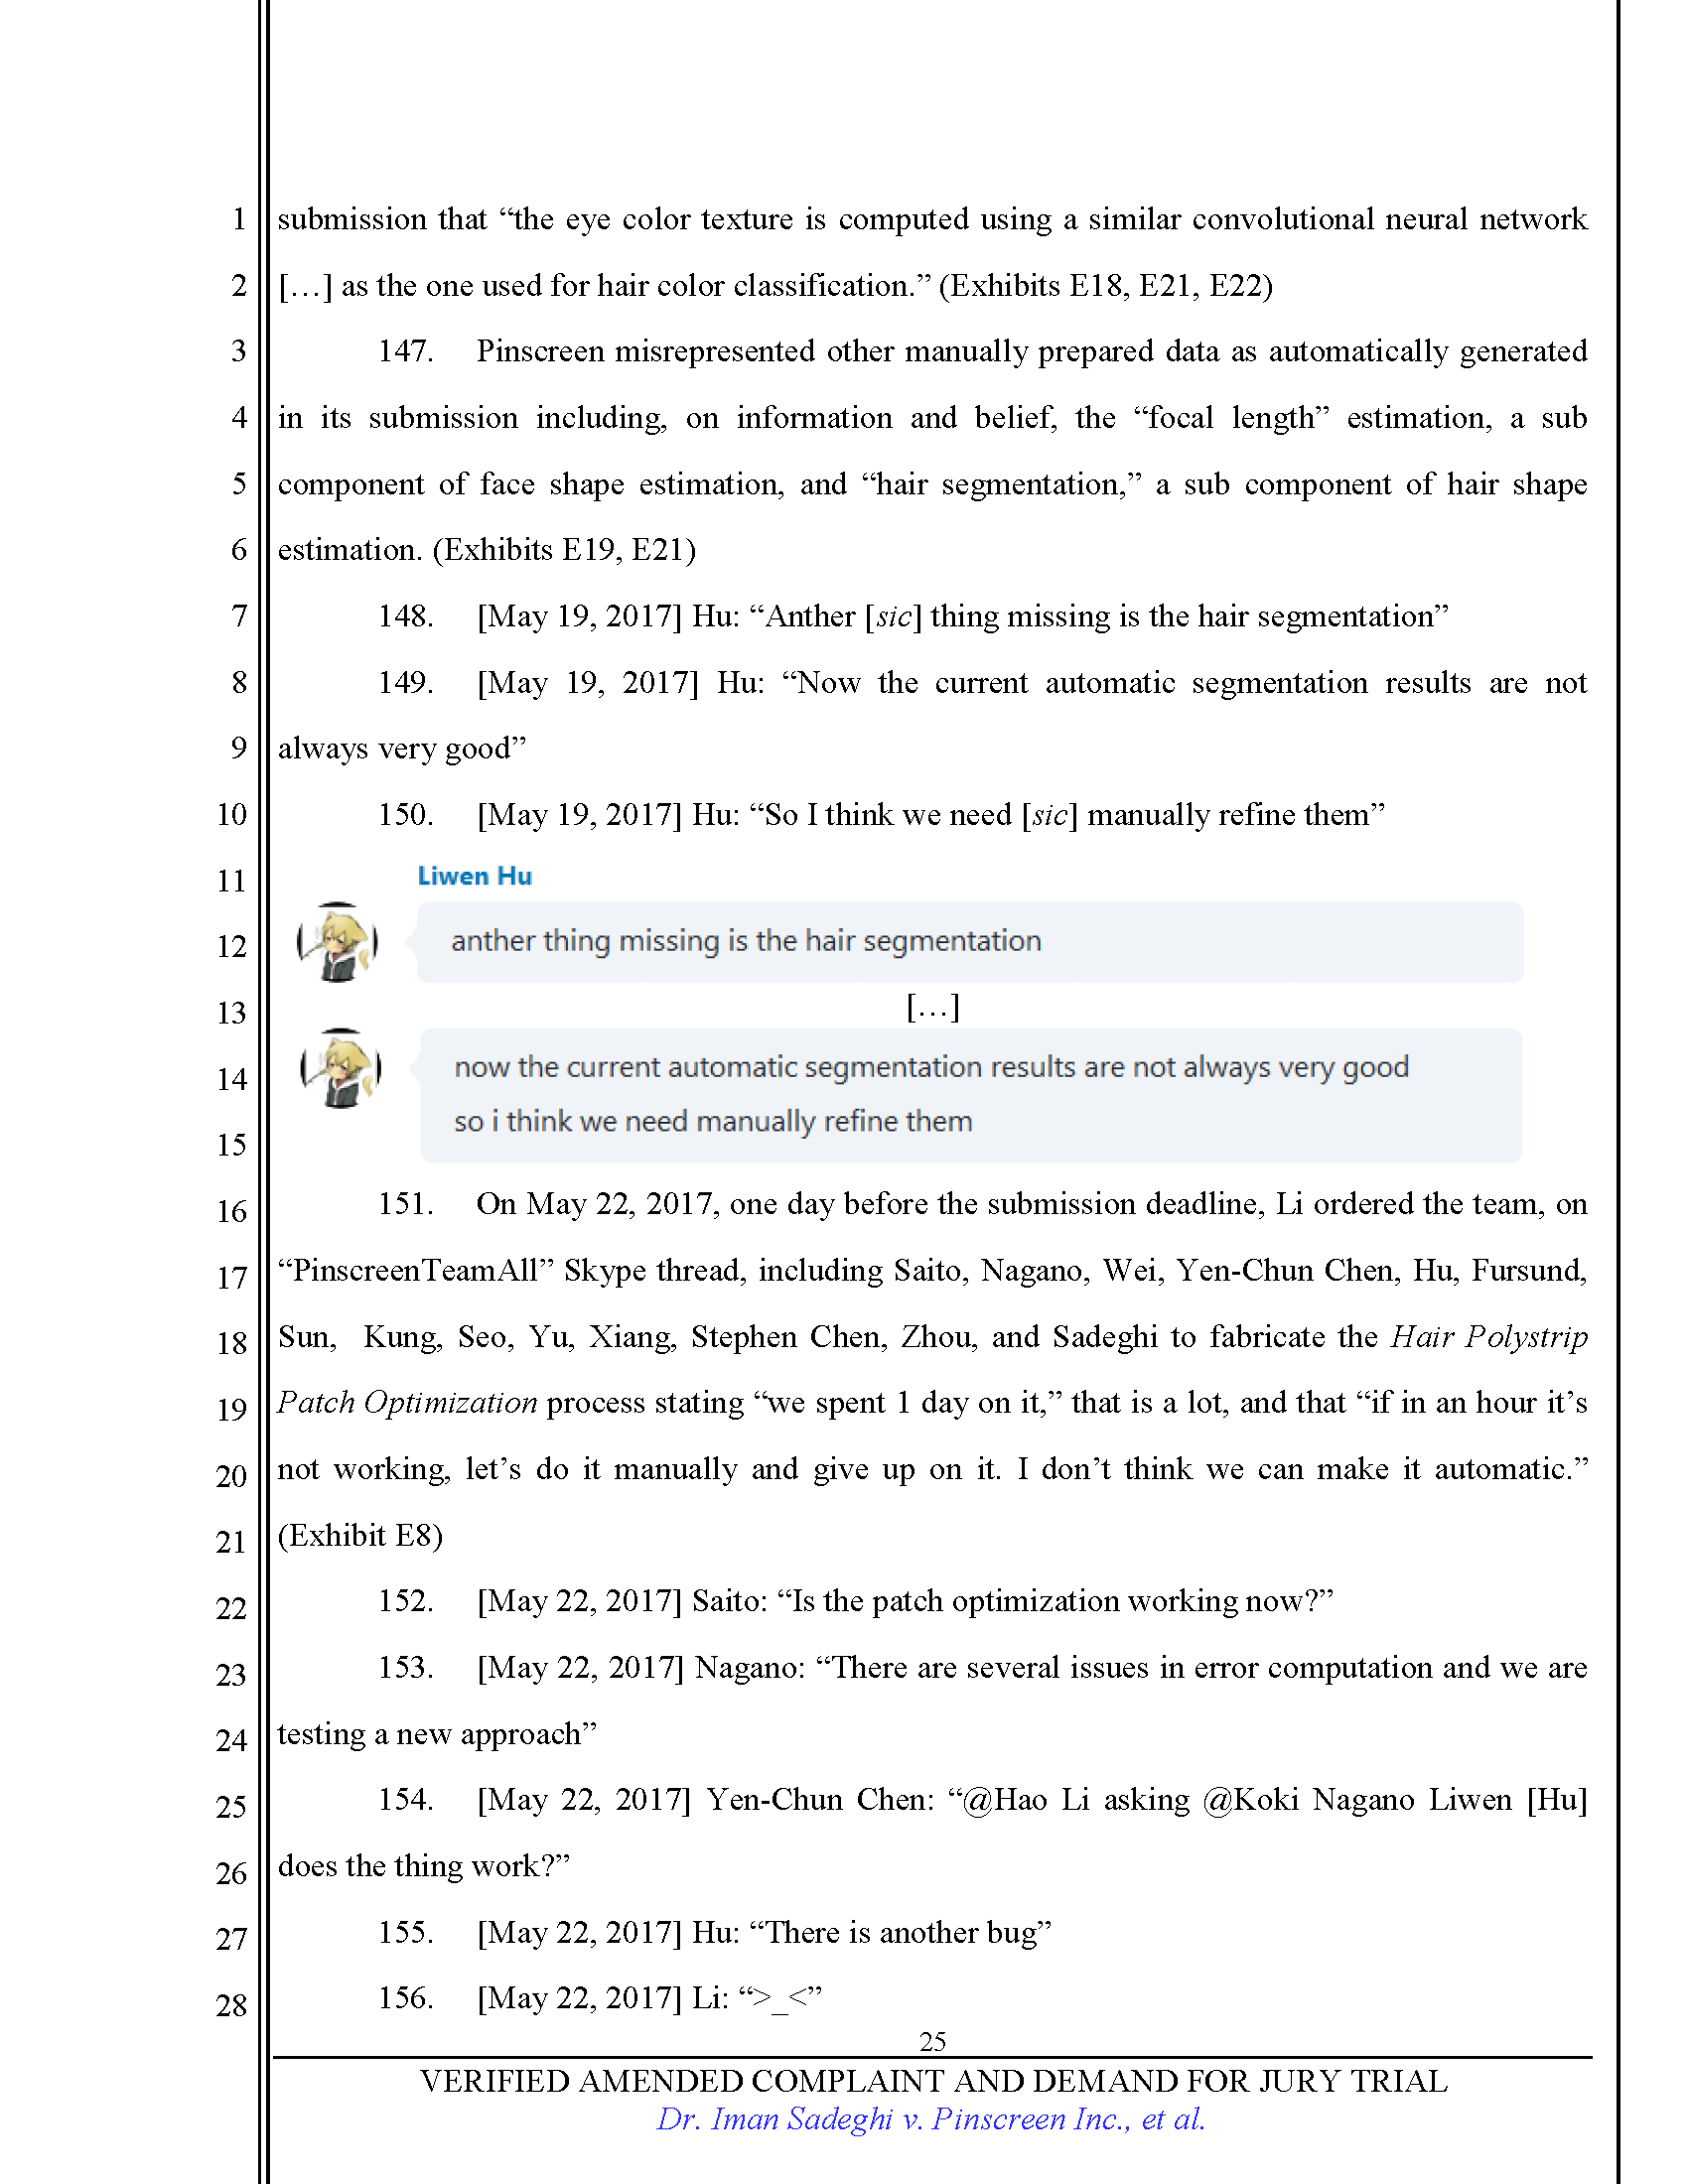 First Amended Complaint (FAC) Page 25